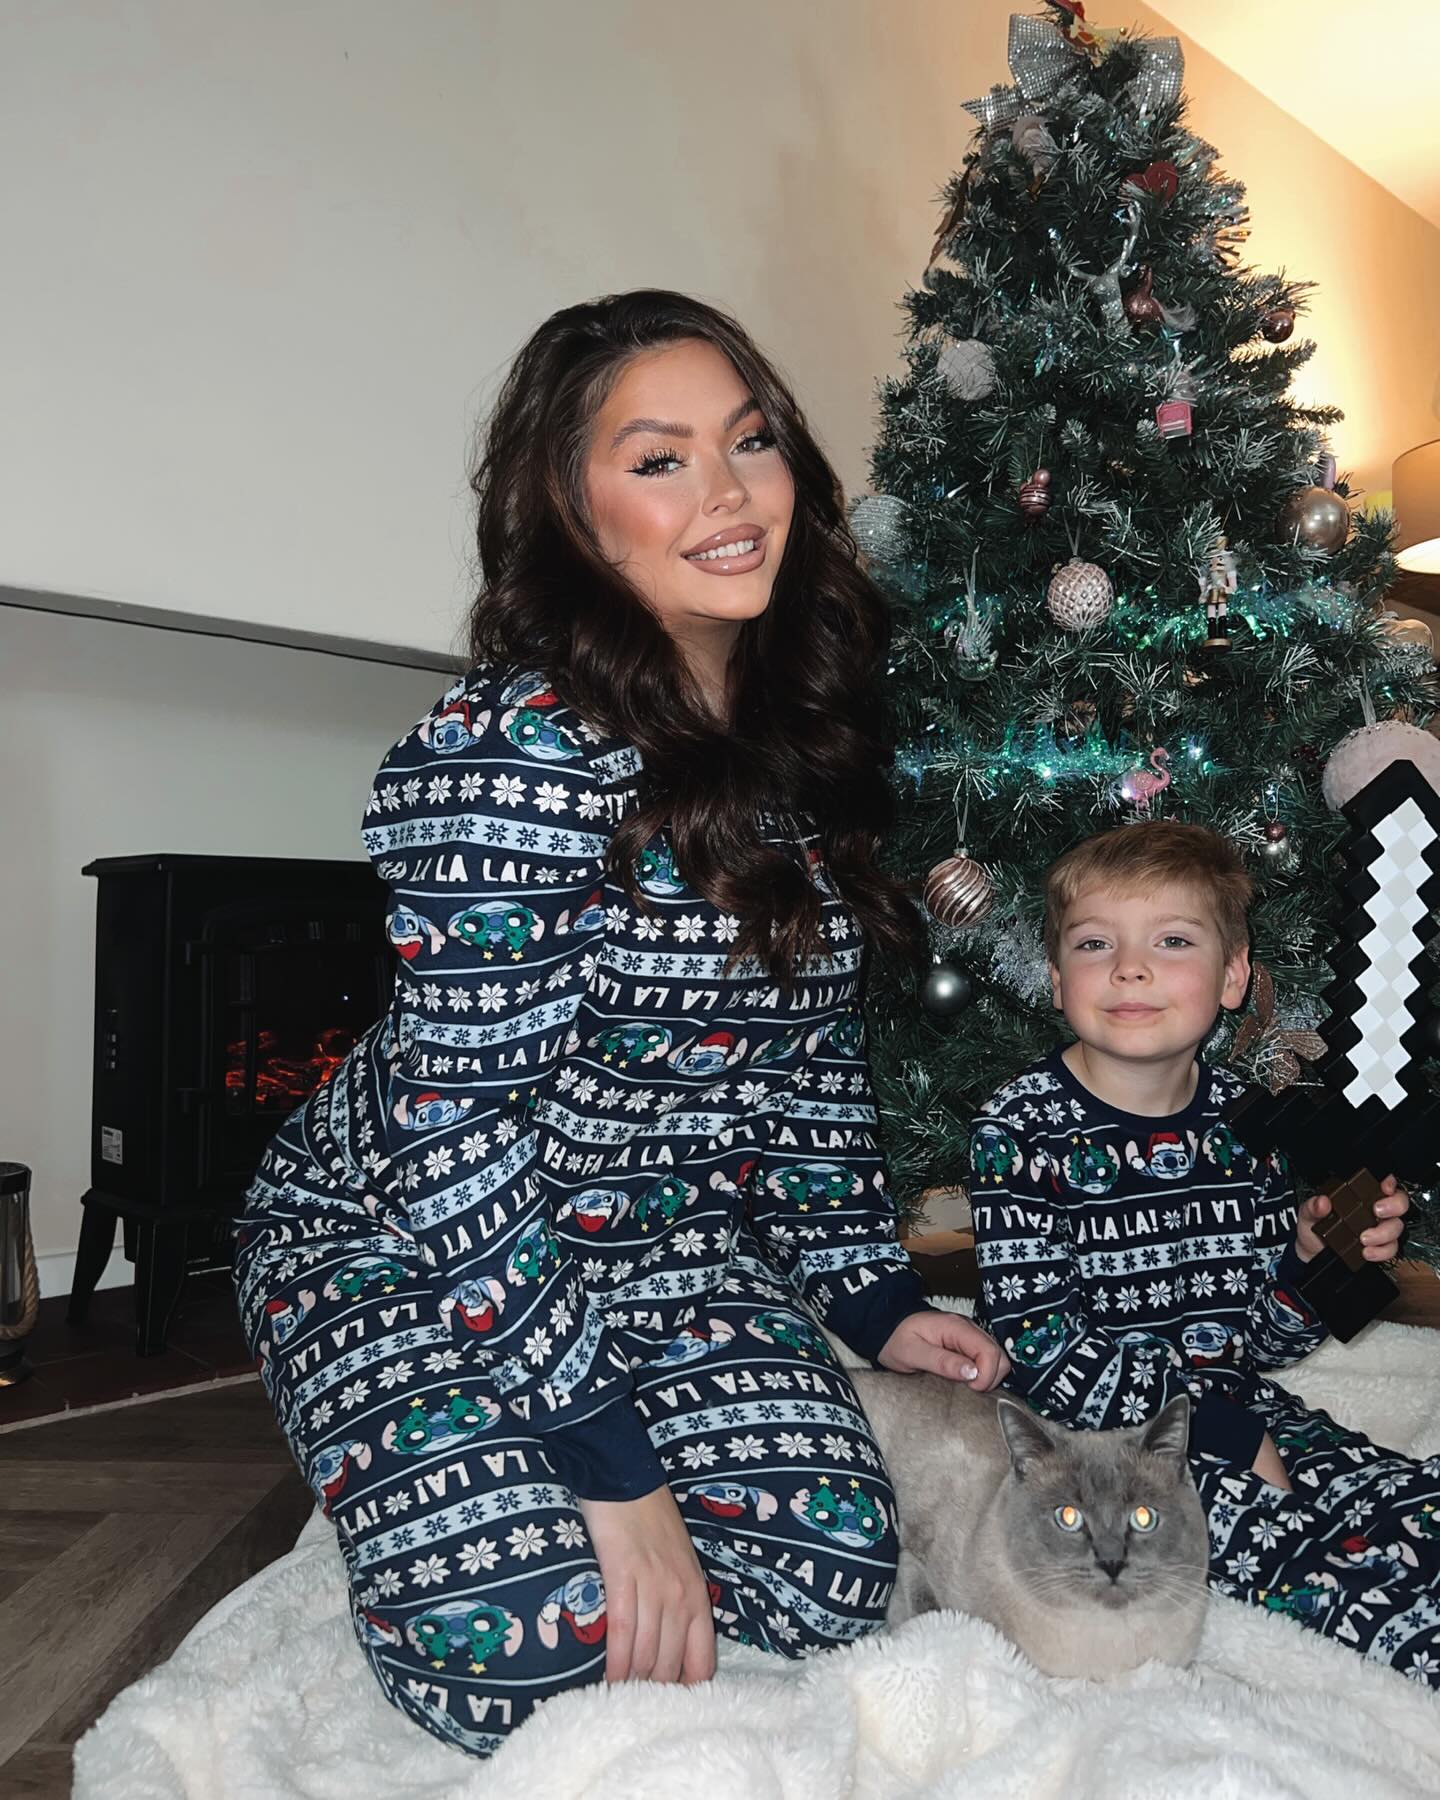 Merry Christmas from my house to yours from me, Isaac & Bleu! We hope your day is filled with happiness, love & joy. 🩷 all the love x 

-
-
-
-
#christmas #christmasday #family #xmaspics #merrychristmas #ootd #motd #matchingpjs #selfie #christmastree #ragdoll